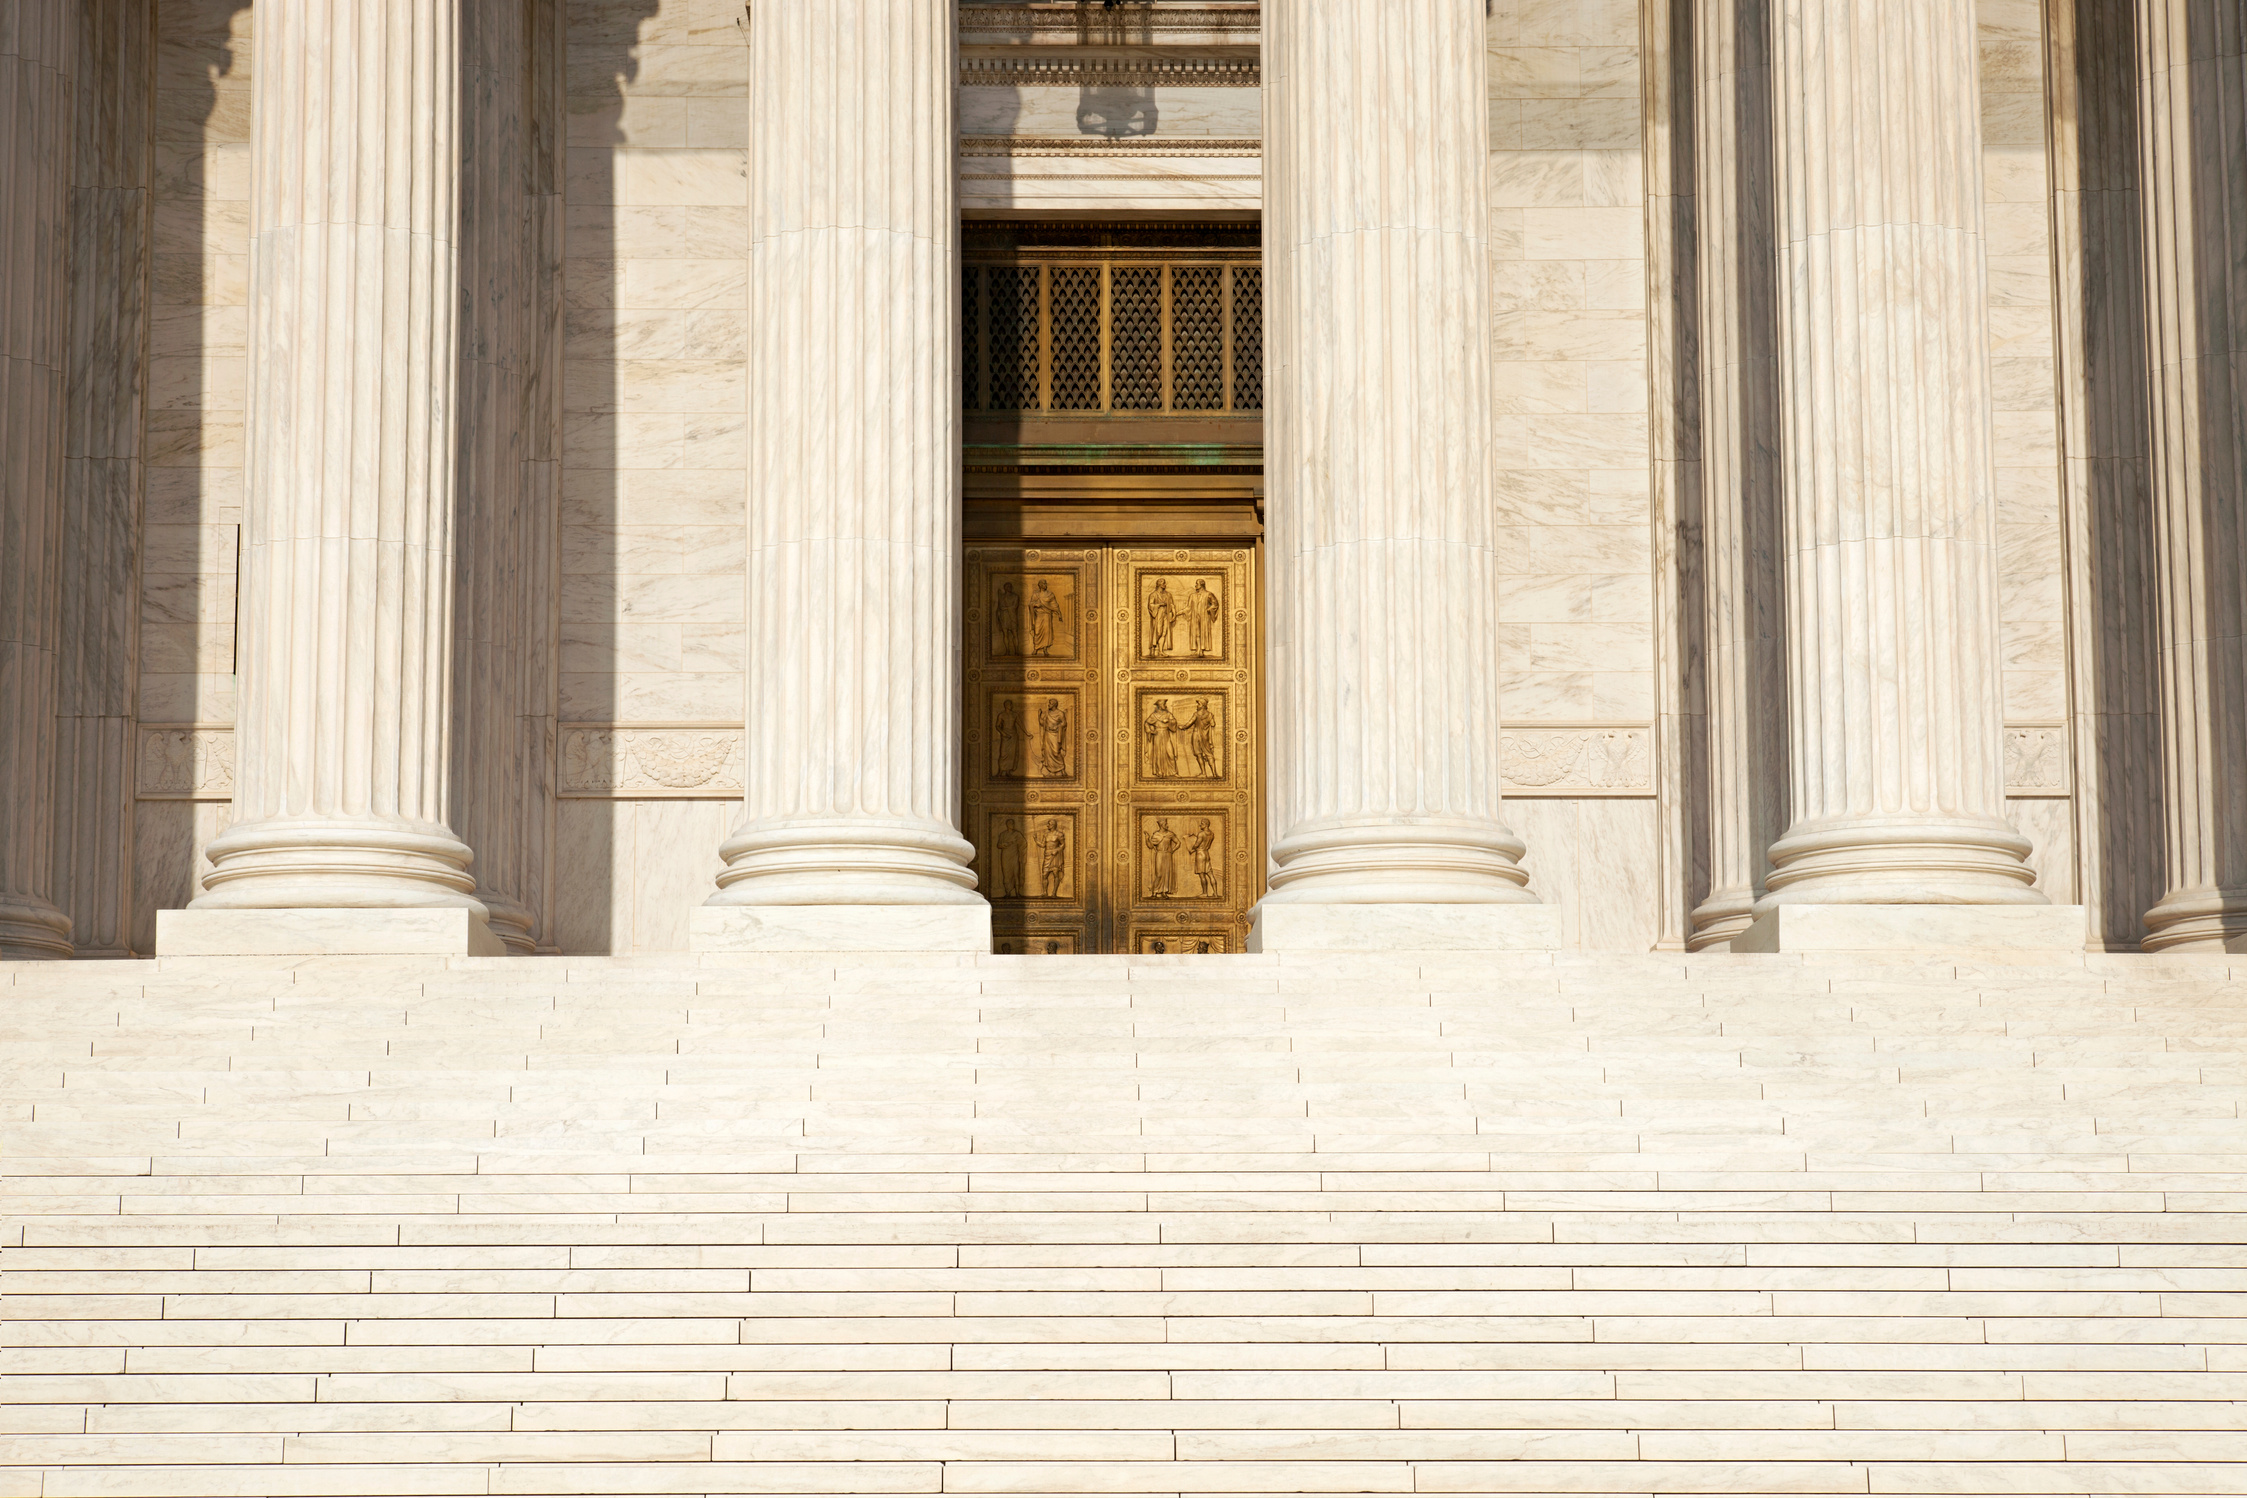 Columns steps and doors of Supreme Court building